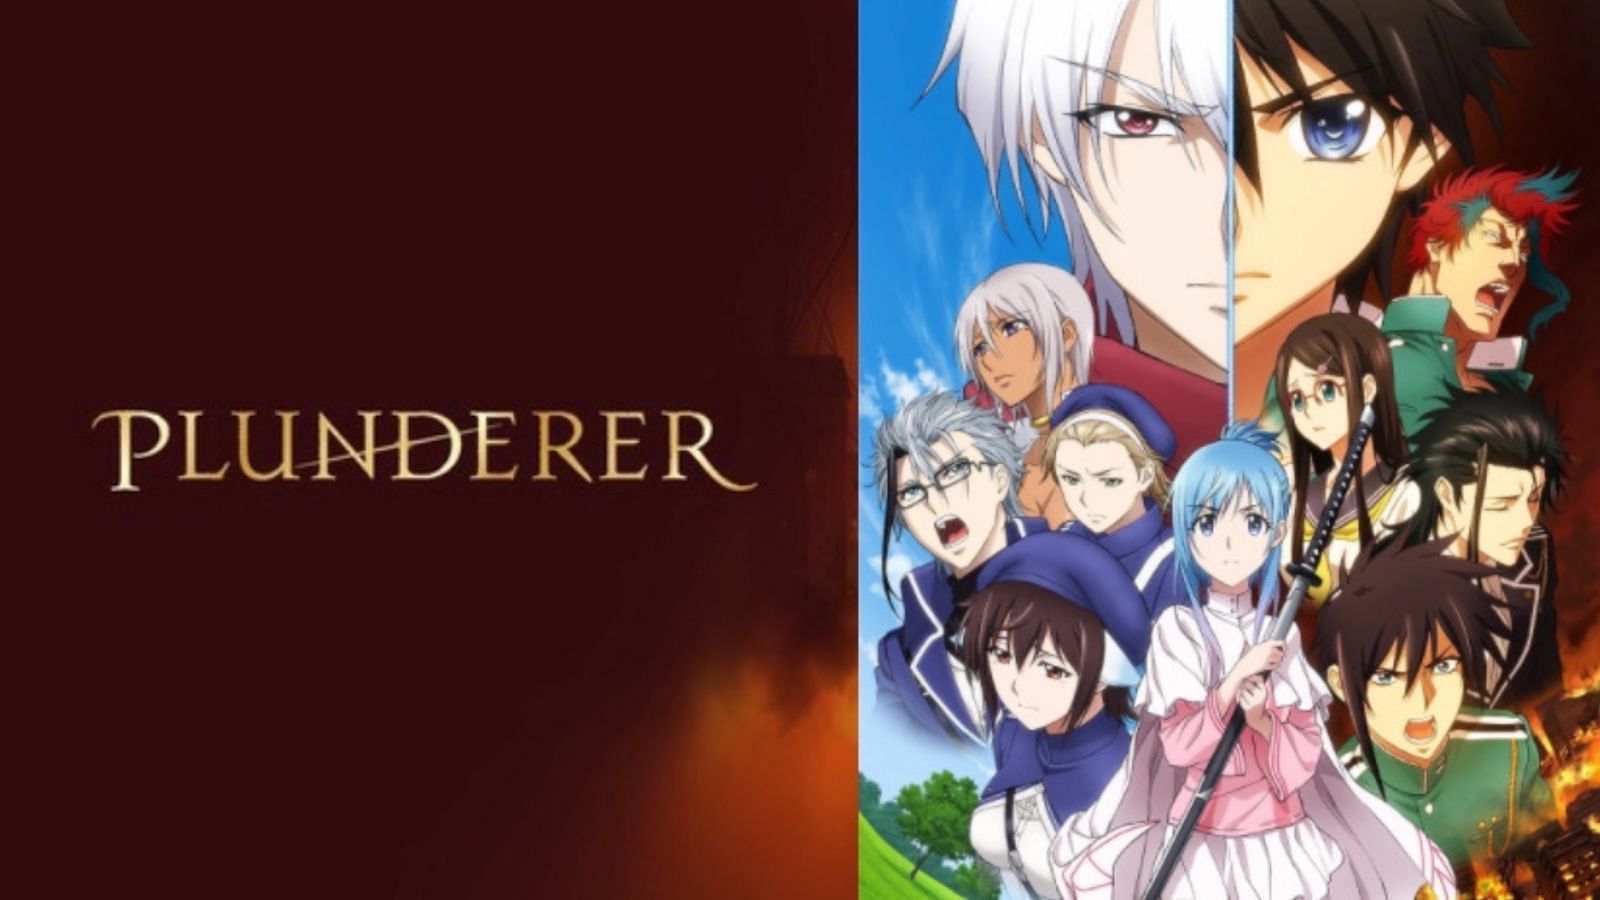 Where to watch Plunderer anime All streaming platforms explored